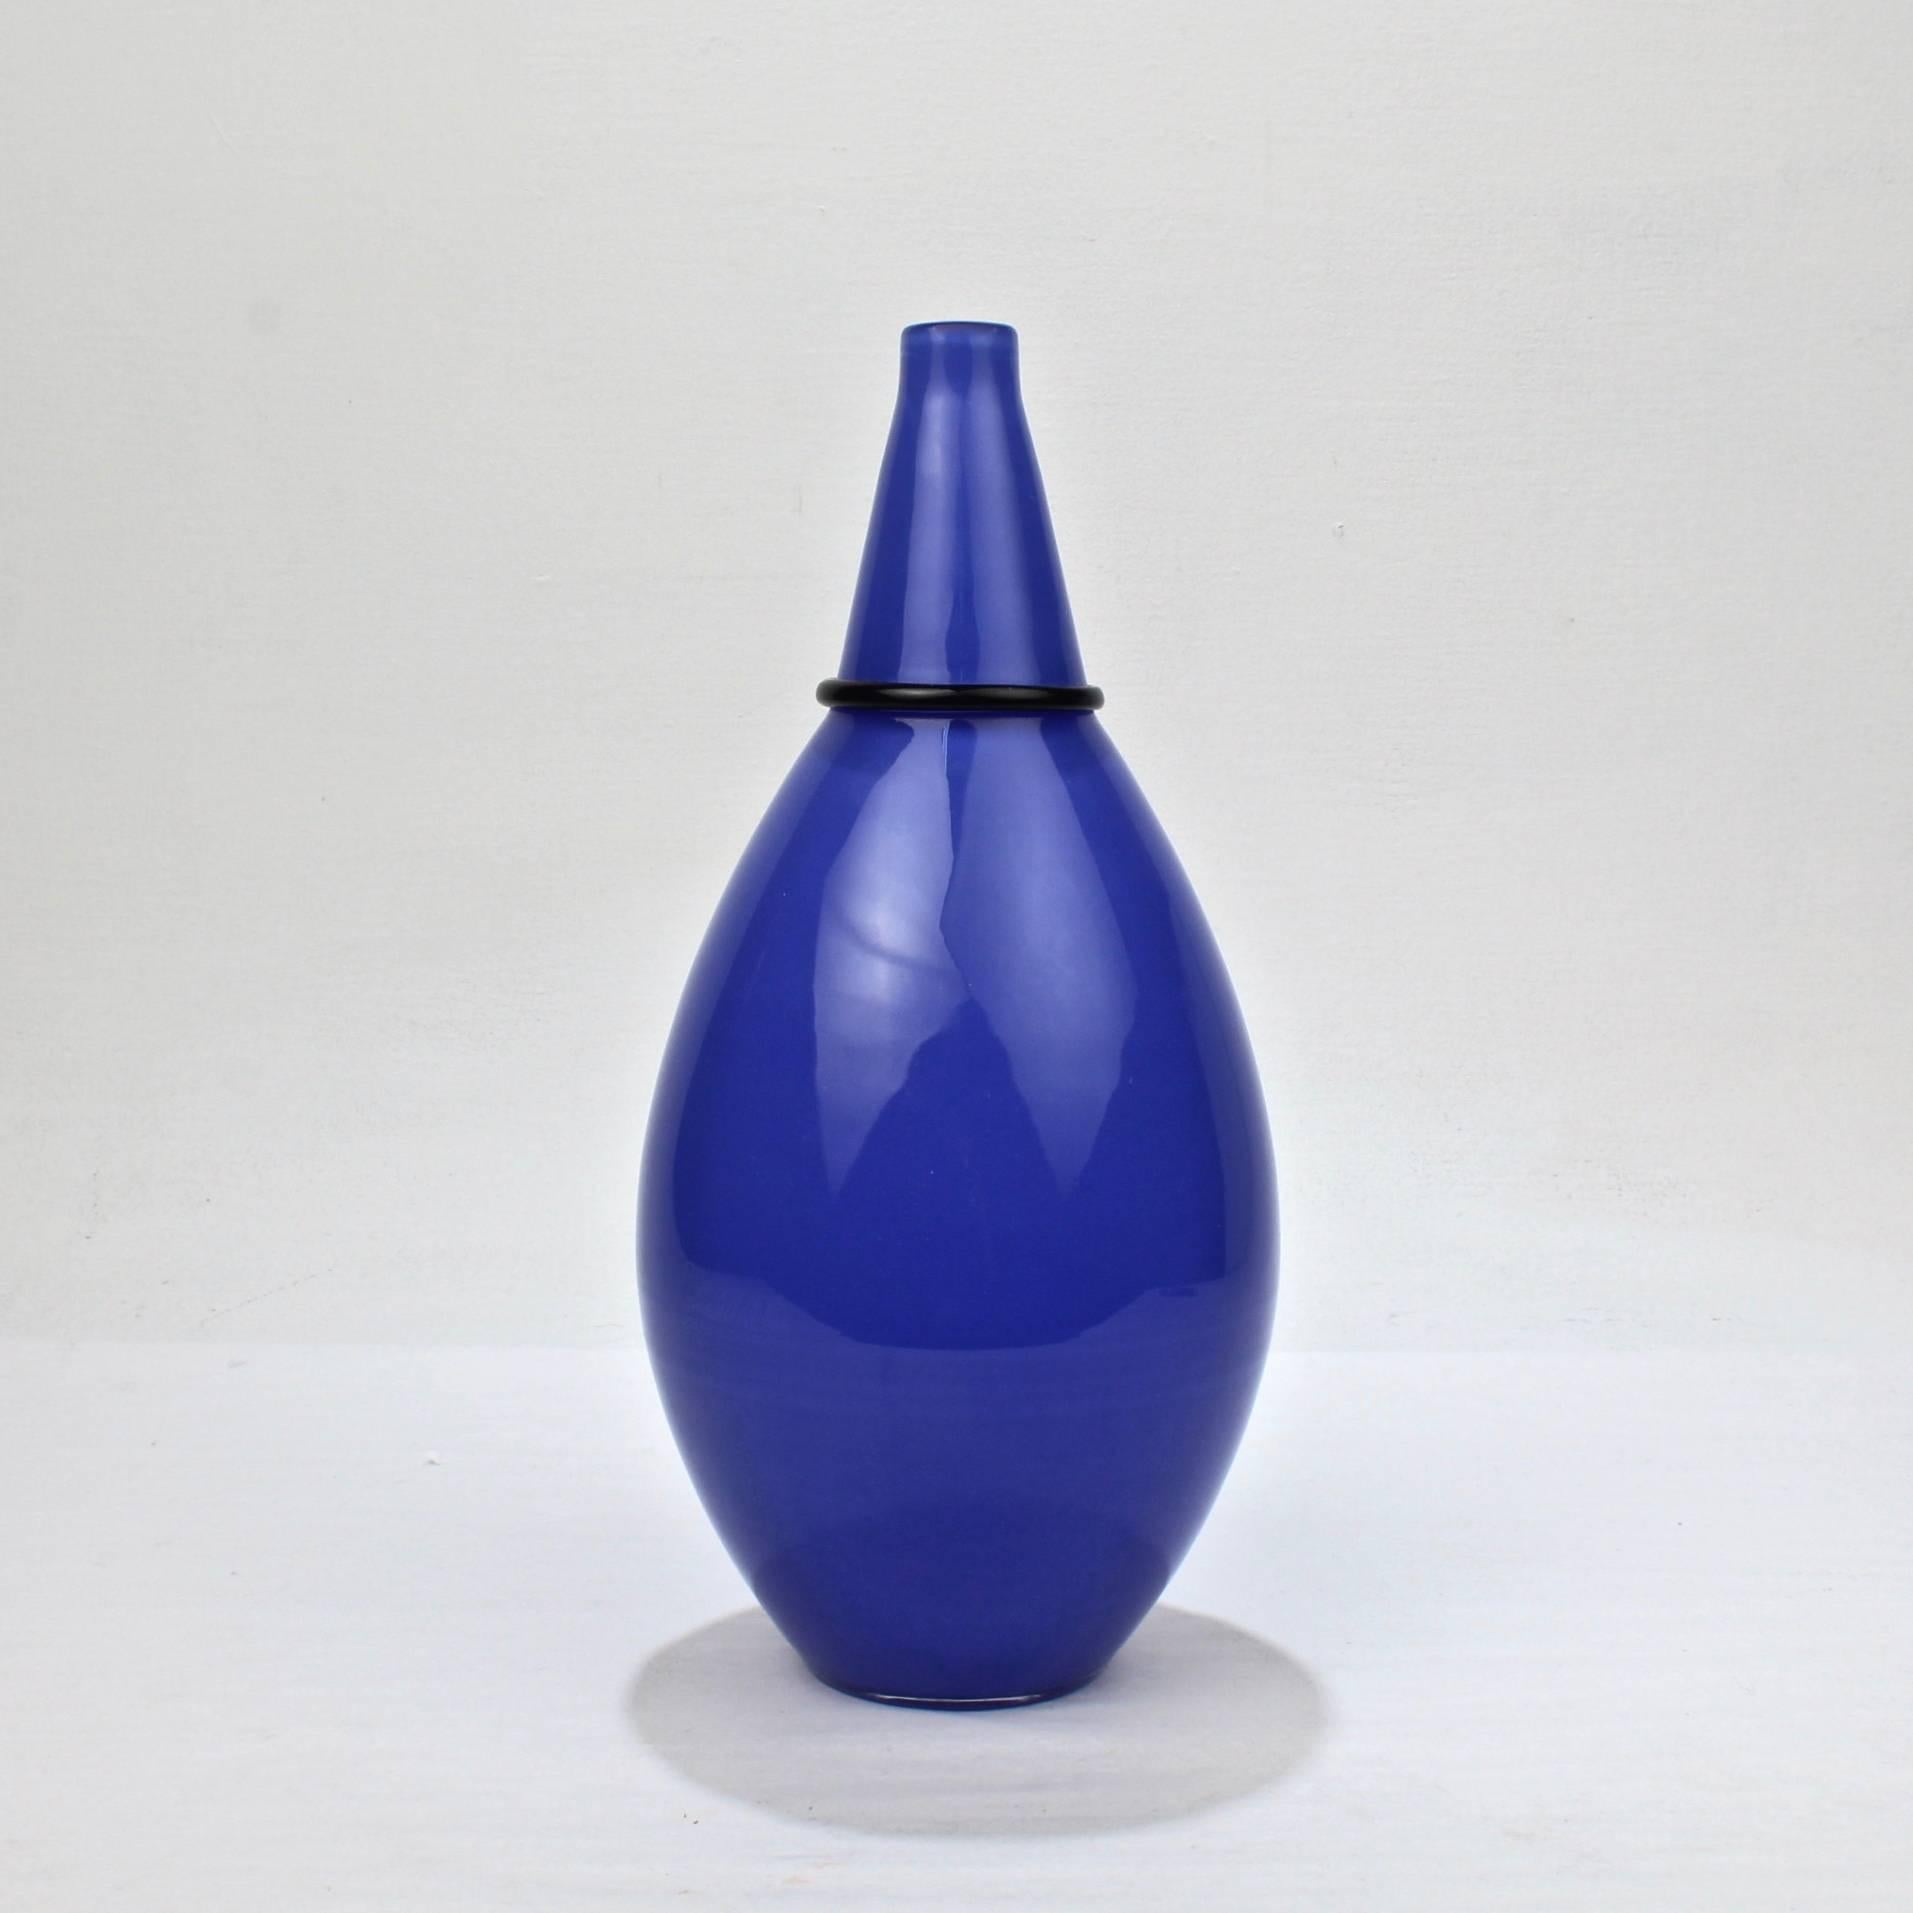 A very good Murano glass vase by Lino Tagliapietra and Marina Angelin with Effetre International for Oggetti. 

An opaque, near royal blue bottle form vase with an applied black band defining the neck. 

A fine example from a one of the Masters